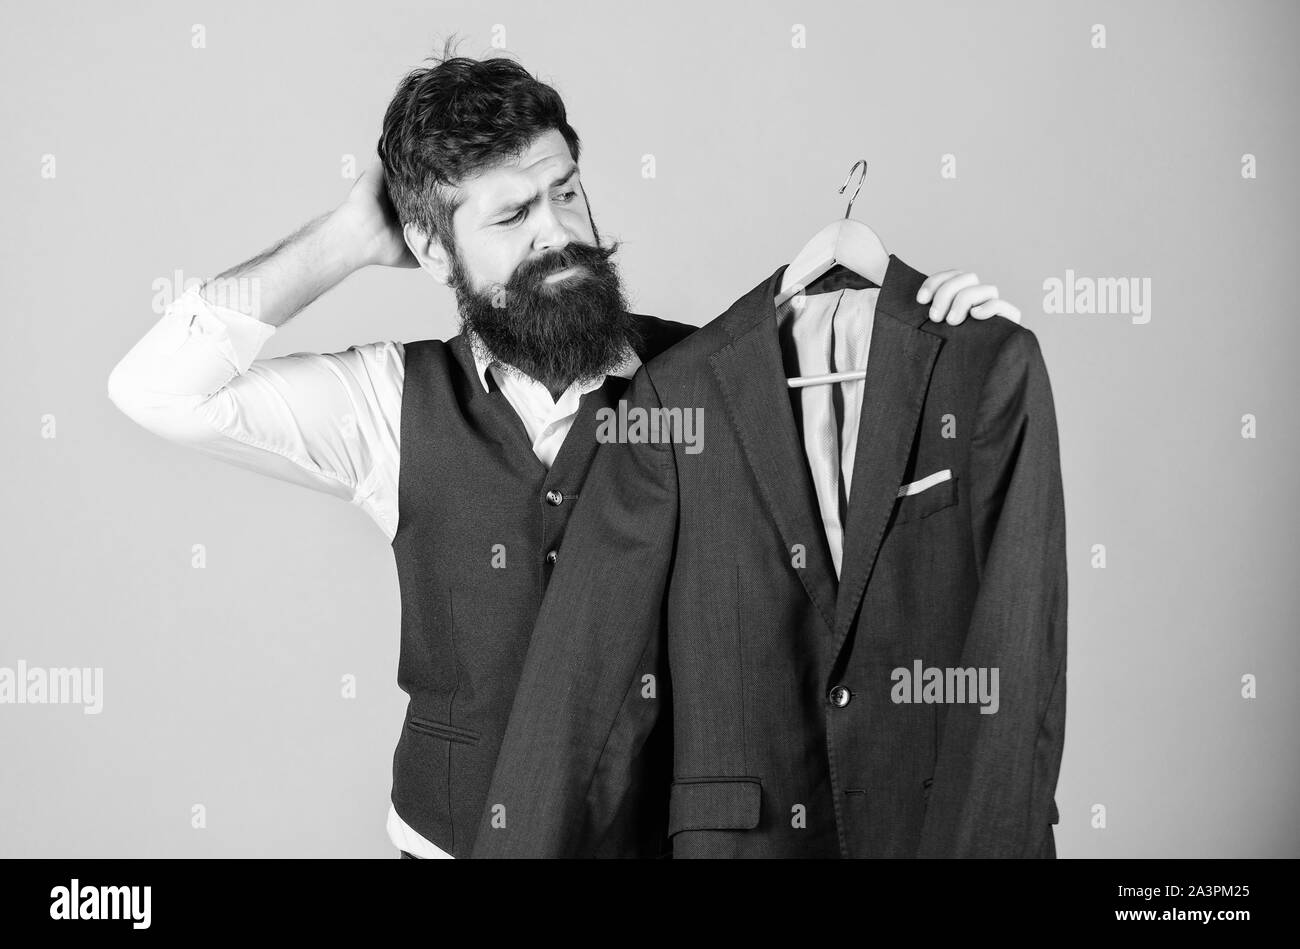 Thinking of what to wear to formal event. Hipster choosing formal suit jacket in wardrobe. Bearded man at formal wear boutique. Classy formal look of fashion model. Stock Photo